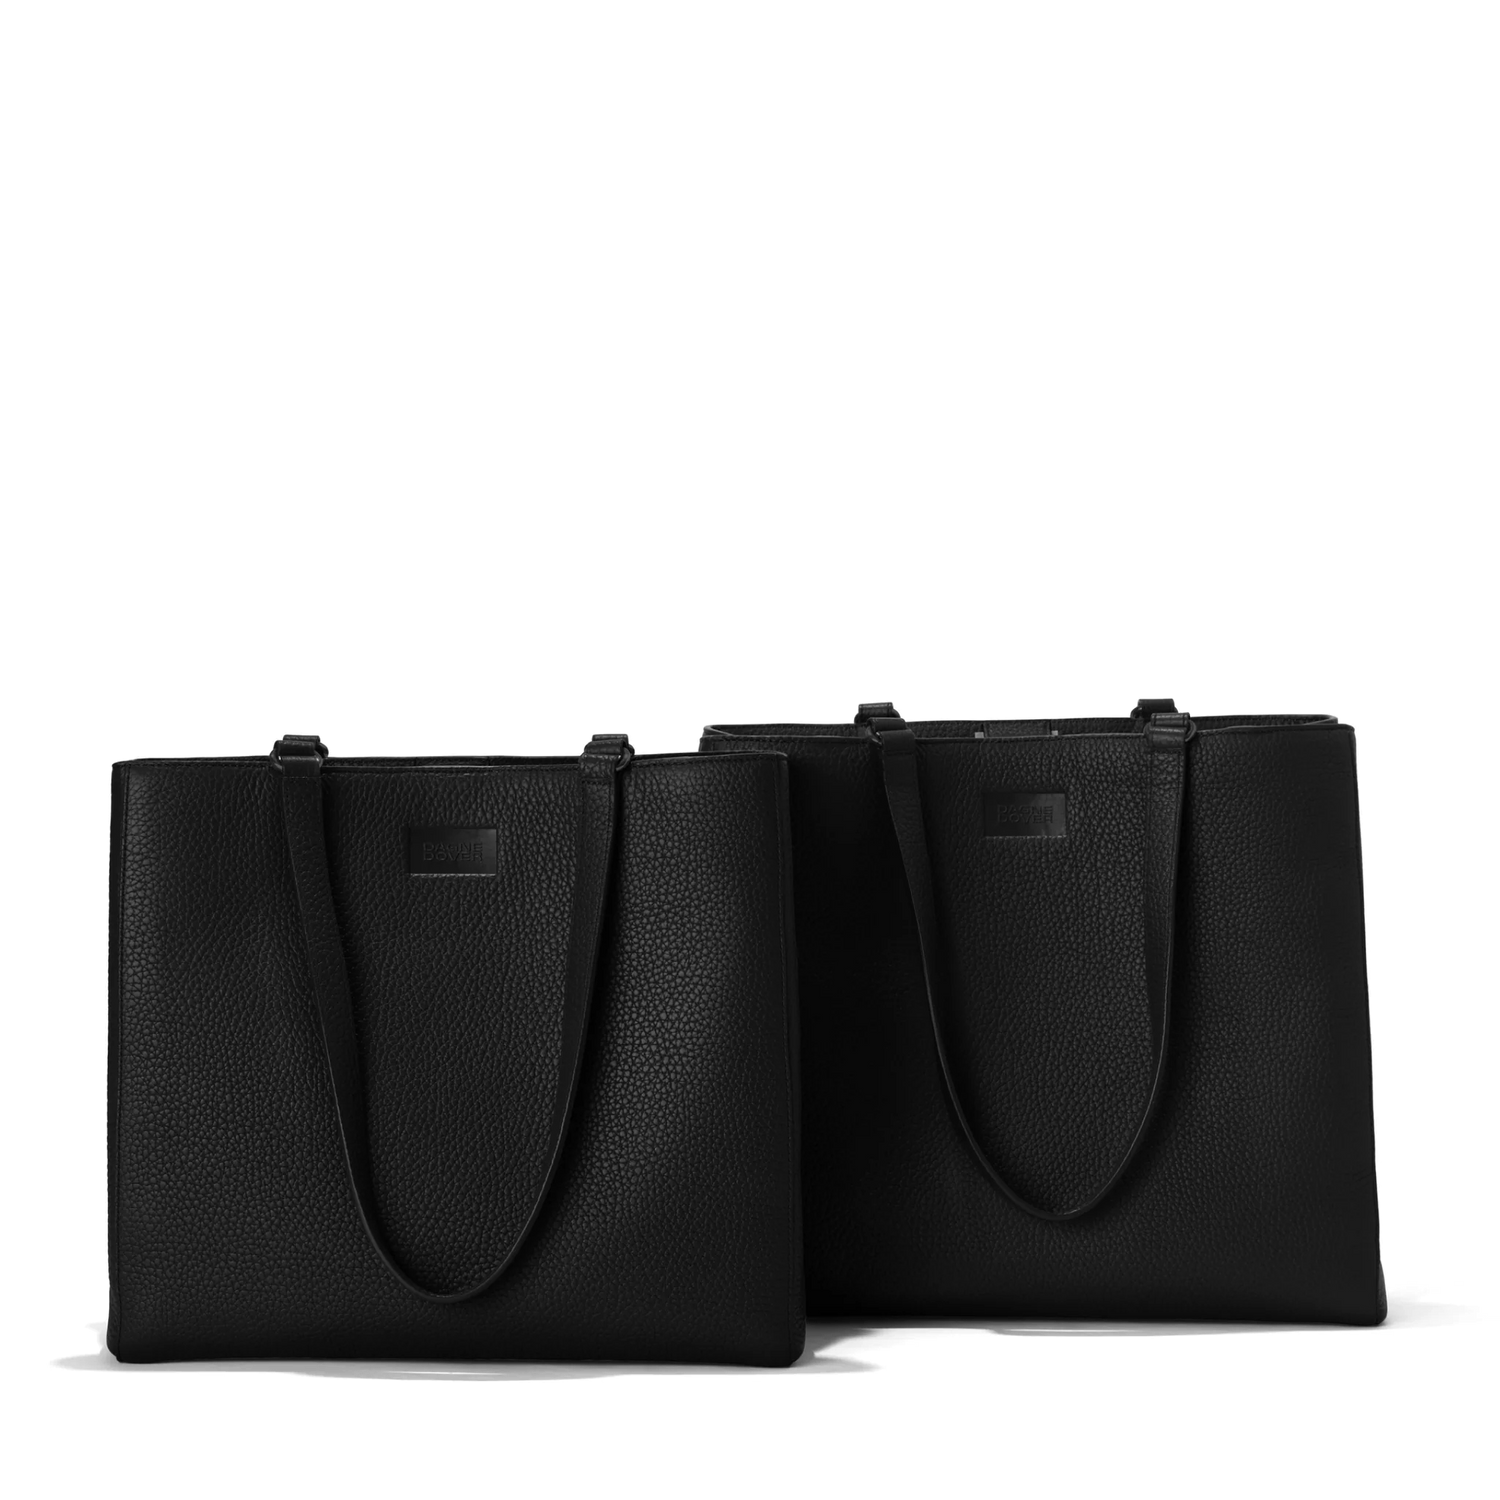 The Allyn Tote from Dagne Dover is an elegant daily-carry bag